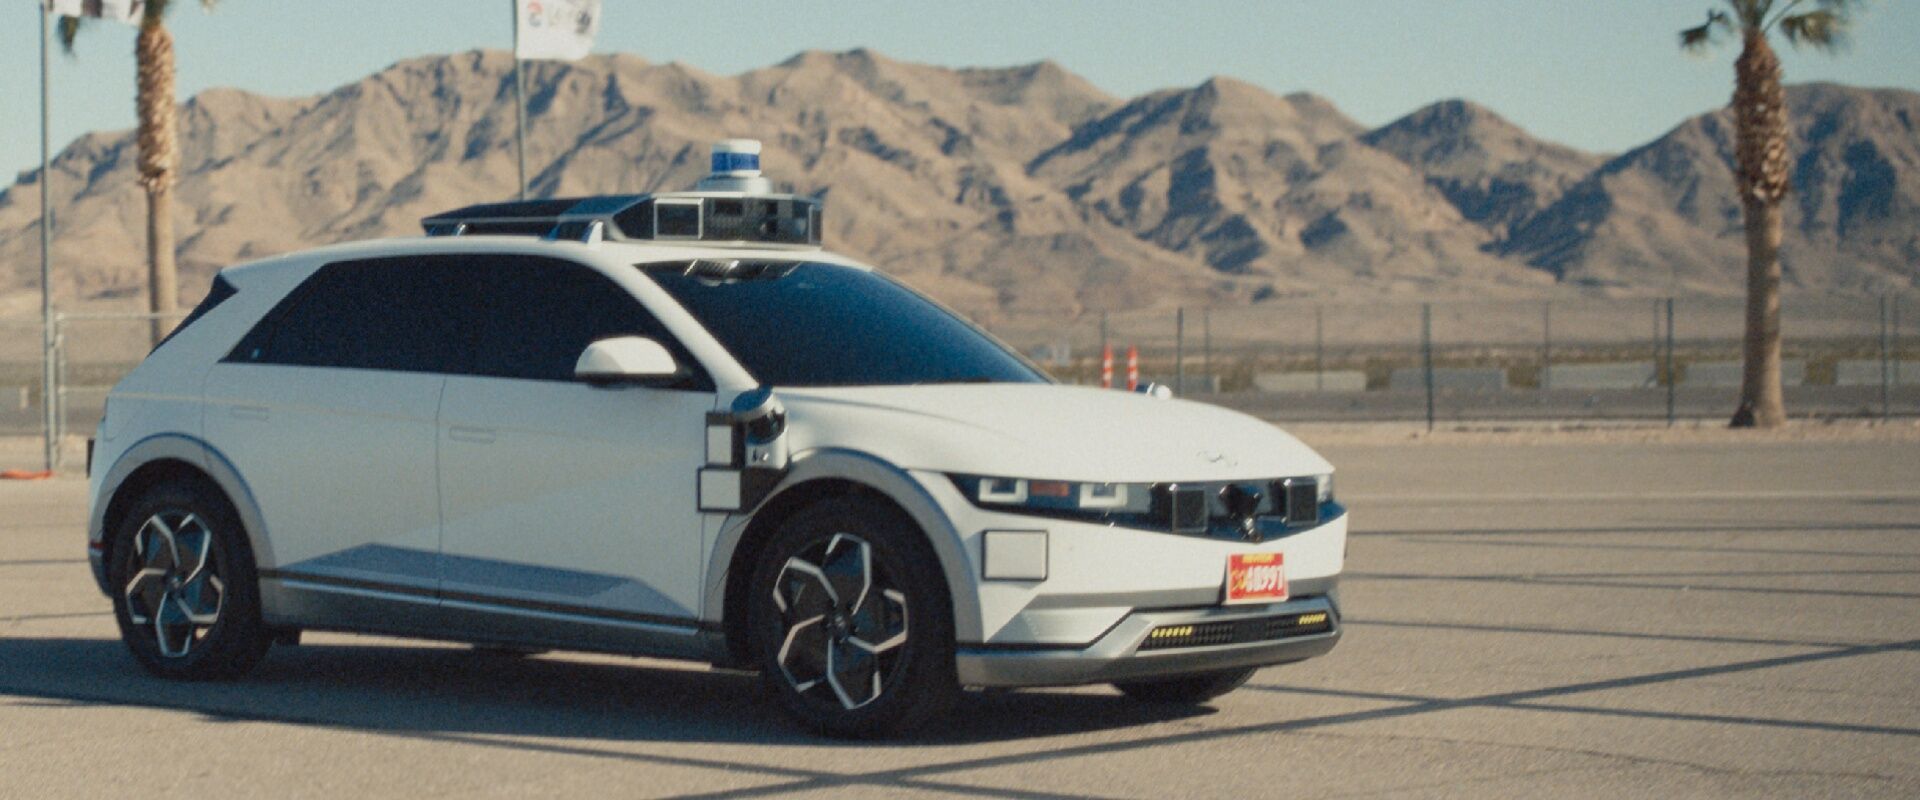 Hyundai Motor Company has released a campaign film showing the all-electric, self-driving IONIQ 5 robotaxi successfully completing a process similar to a U.S. driver’s license test.